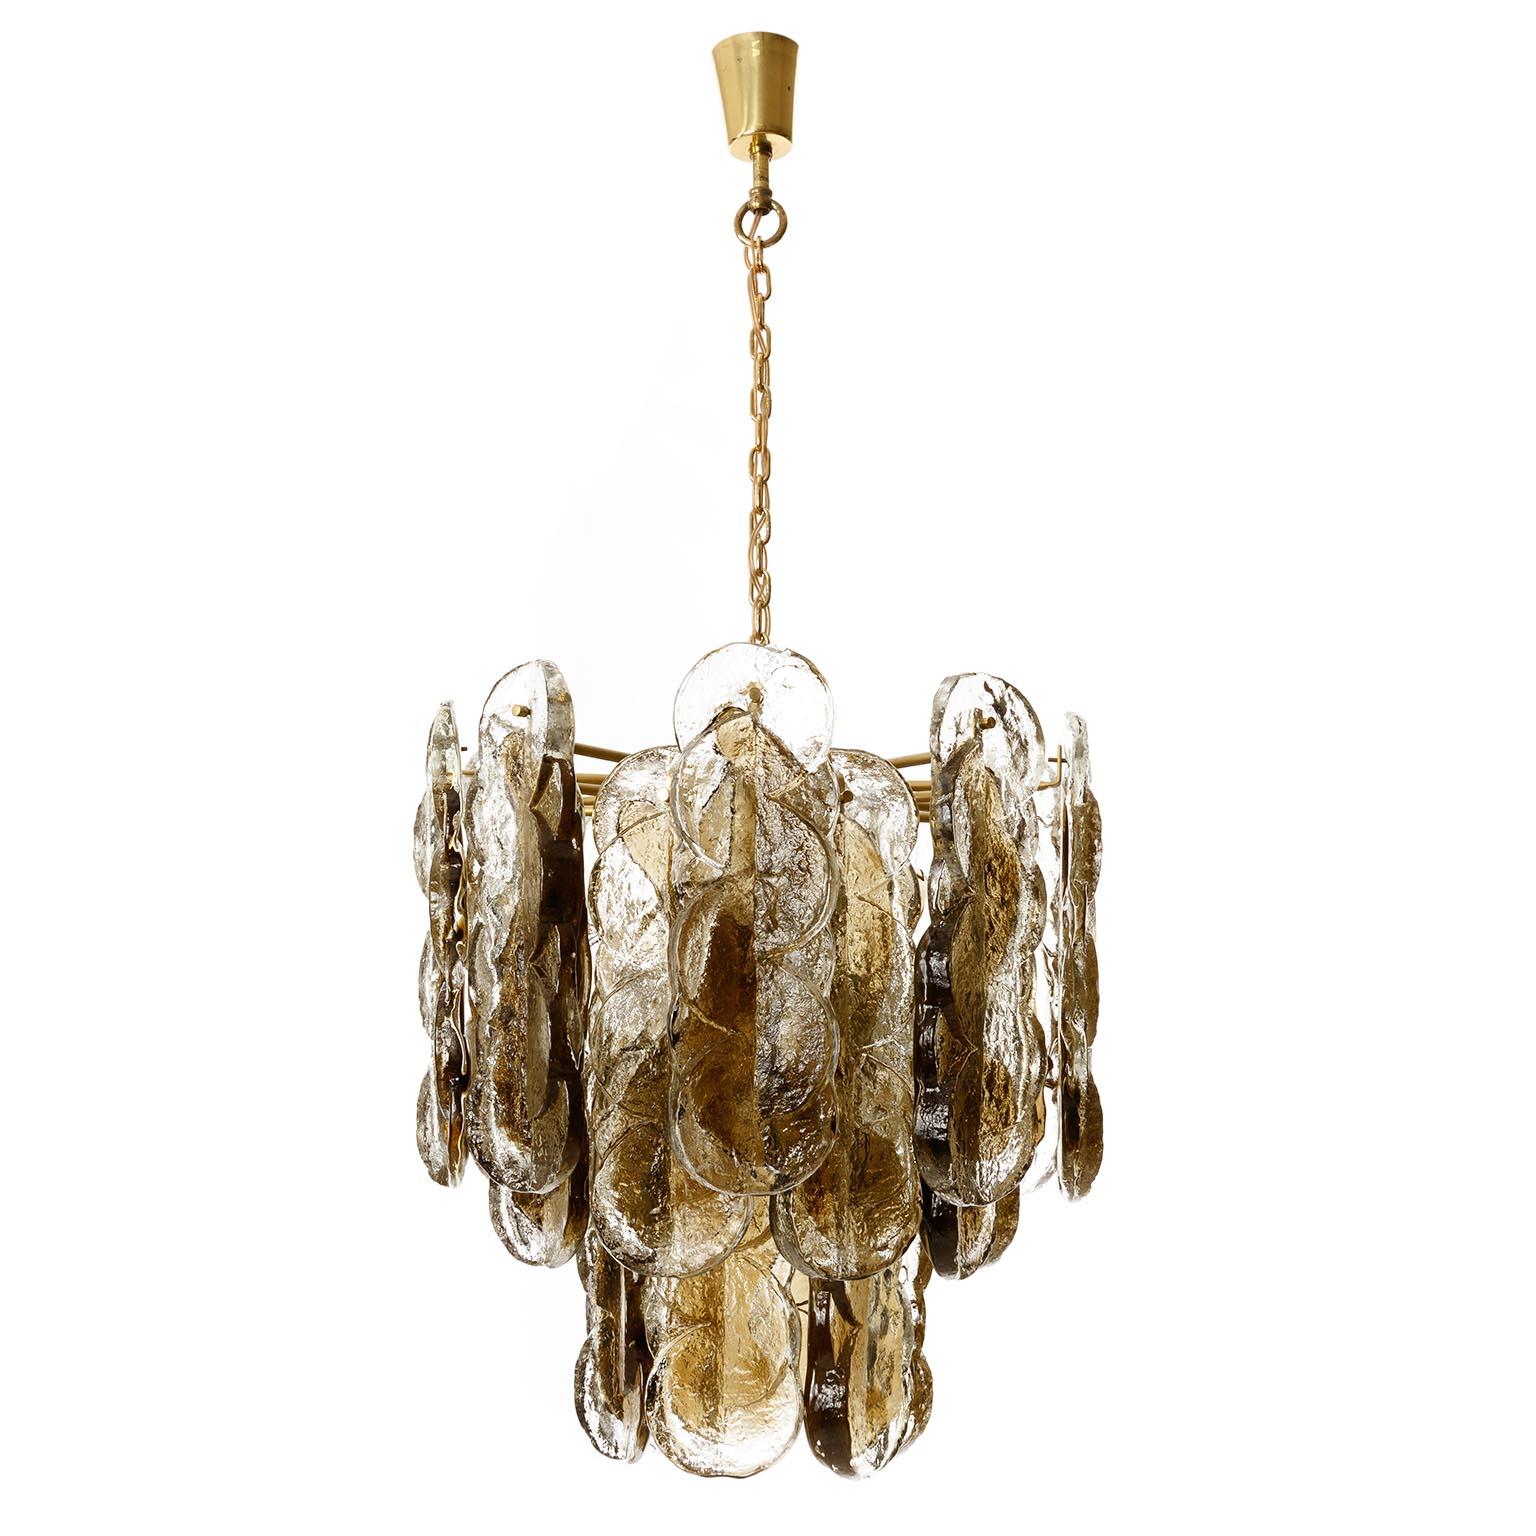 A large and gorgeous chandelier model 'Citrus' by Austrian light maker J.T. Kalmar, manufactured in midcentury, circa 1970 (late 1960s or early 1970s). The light is documented in the Kalmar catalogue from the 1970s.
24 large bi-colored (clear and